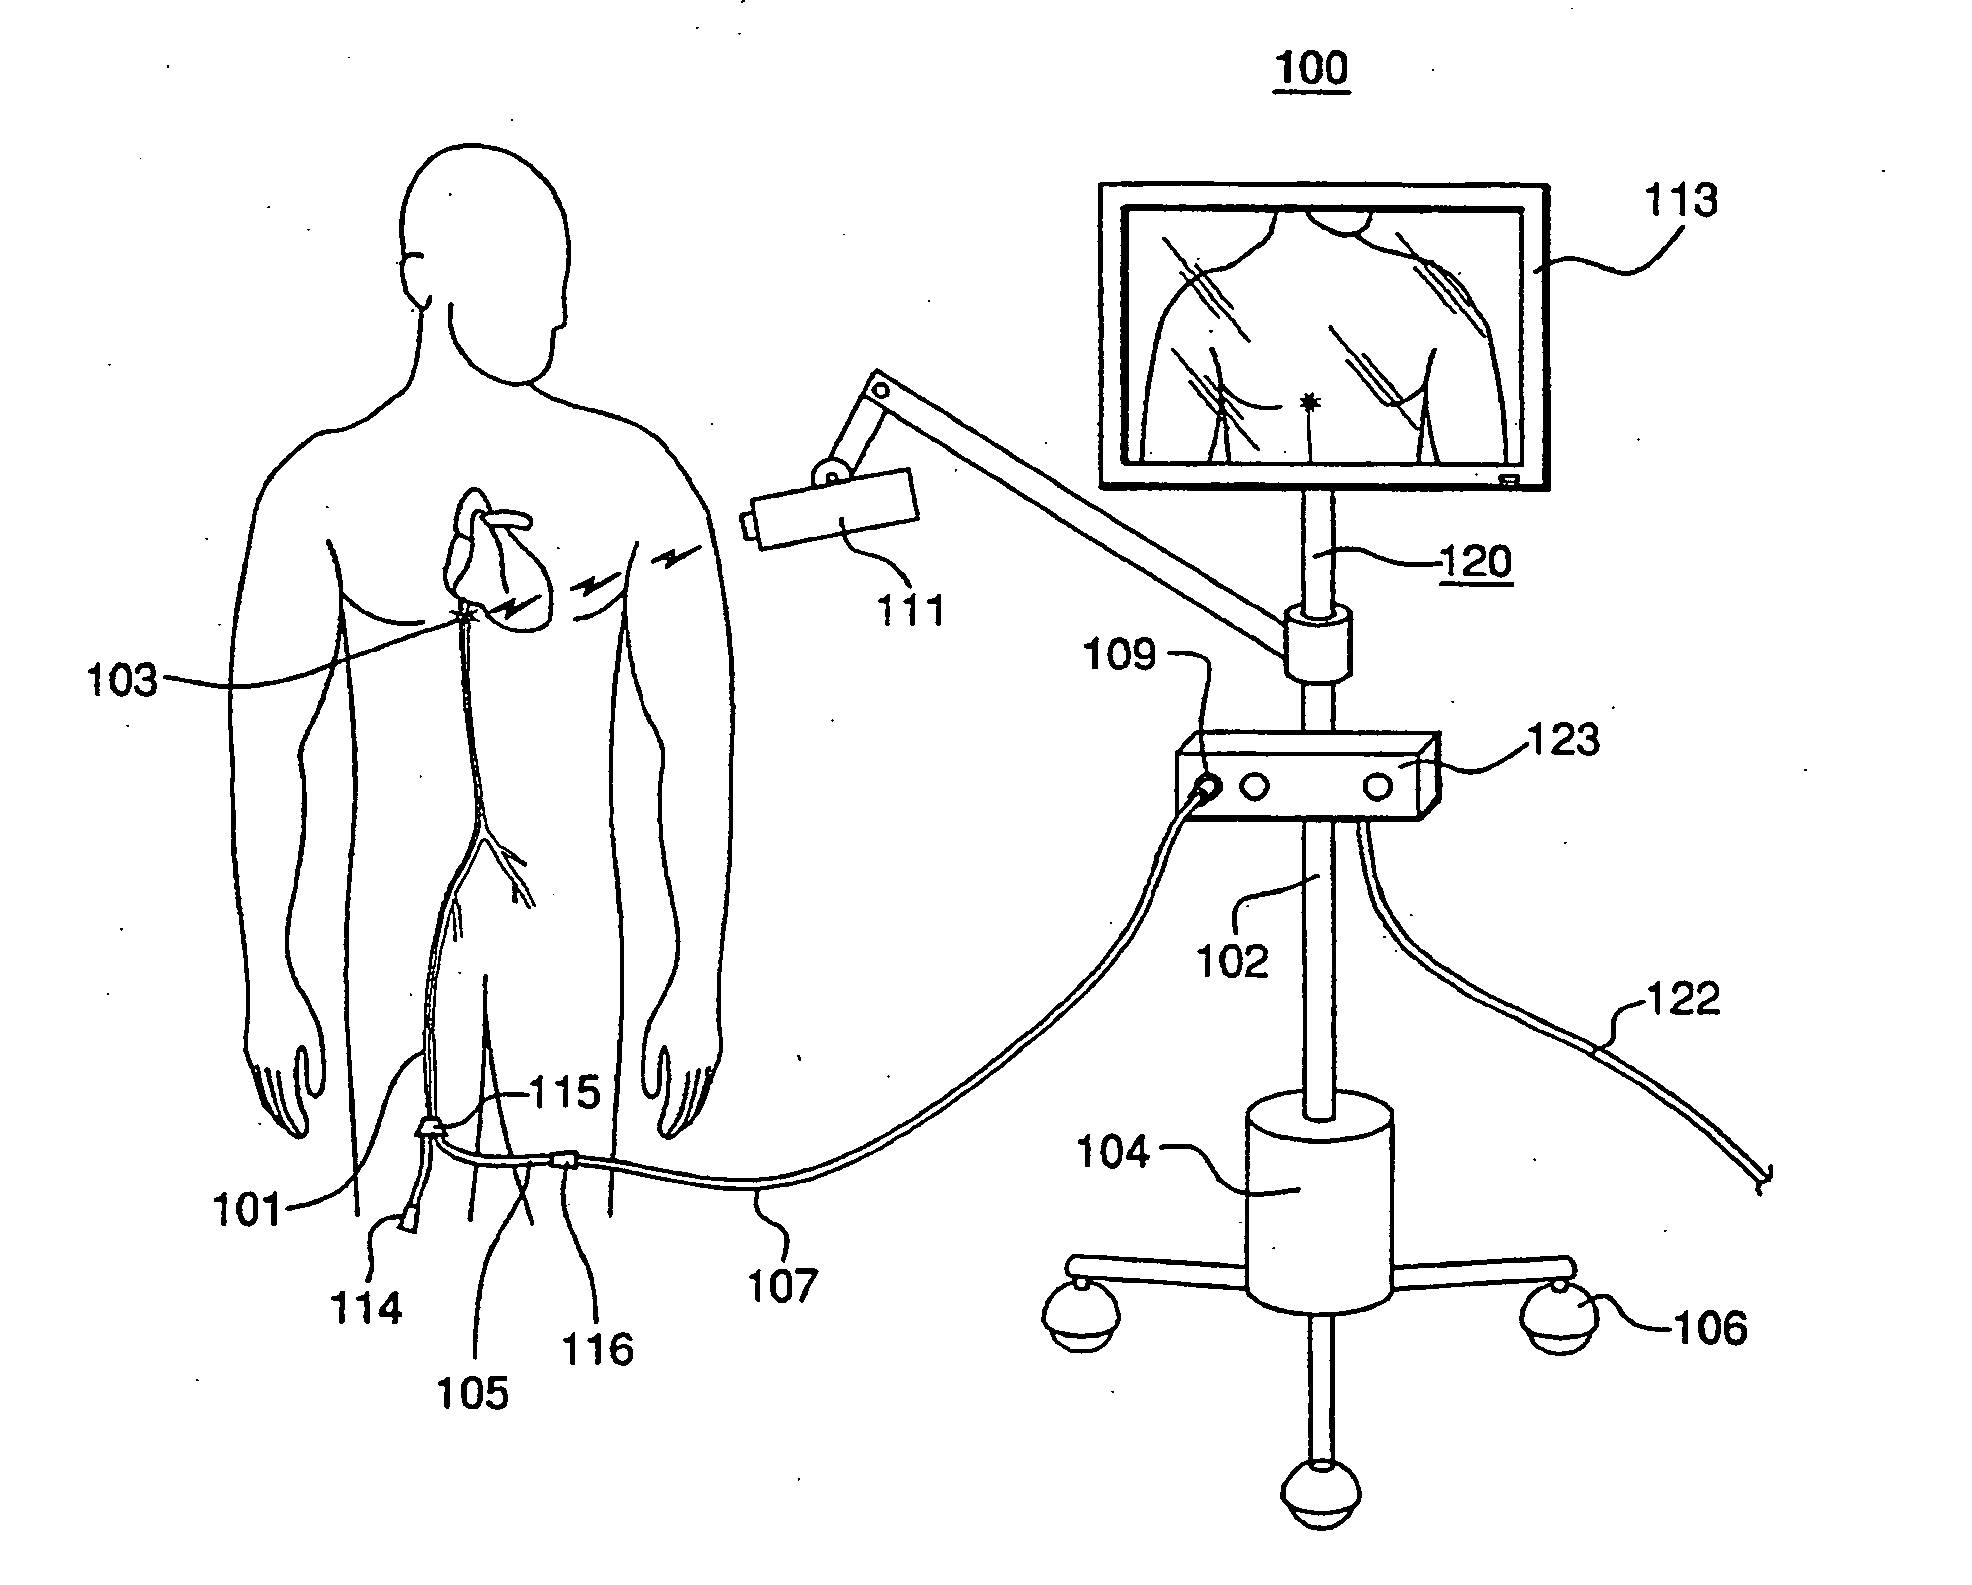 Three-dimensional optical guidance for catheter placement